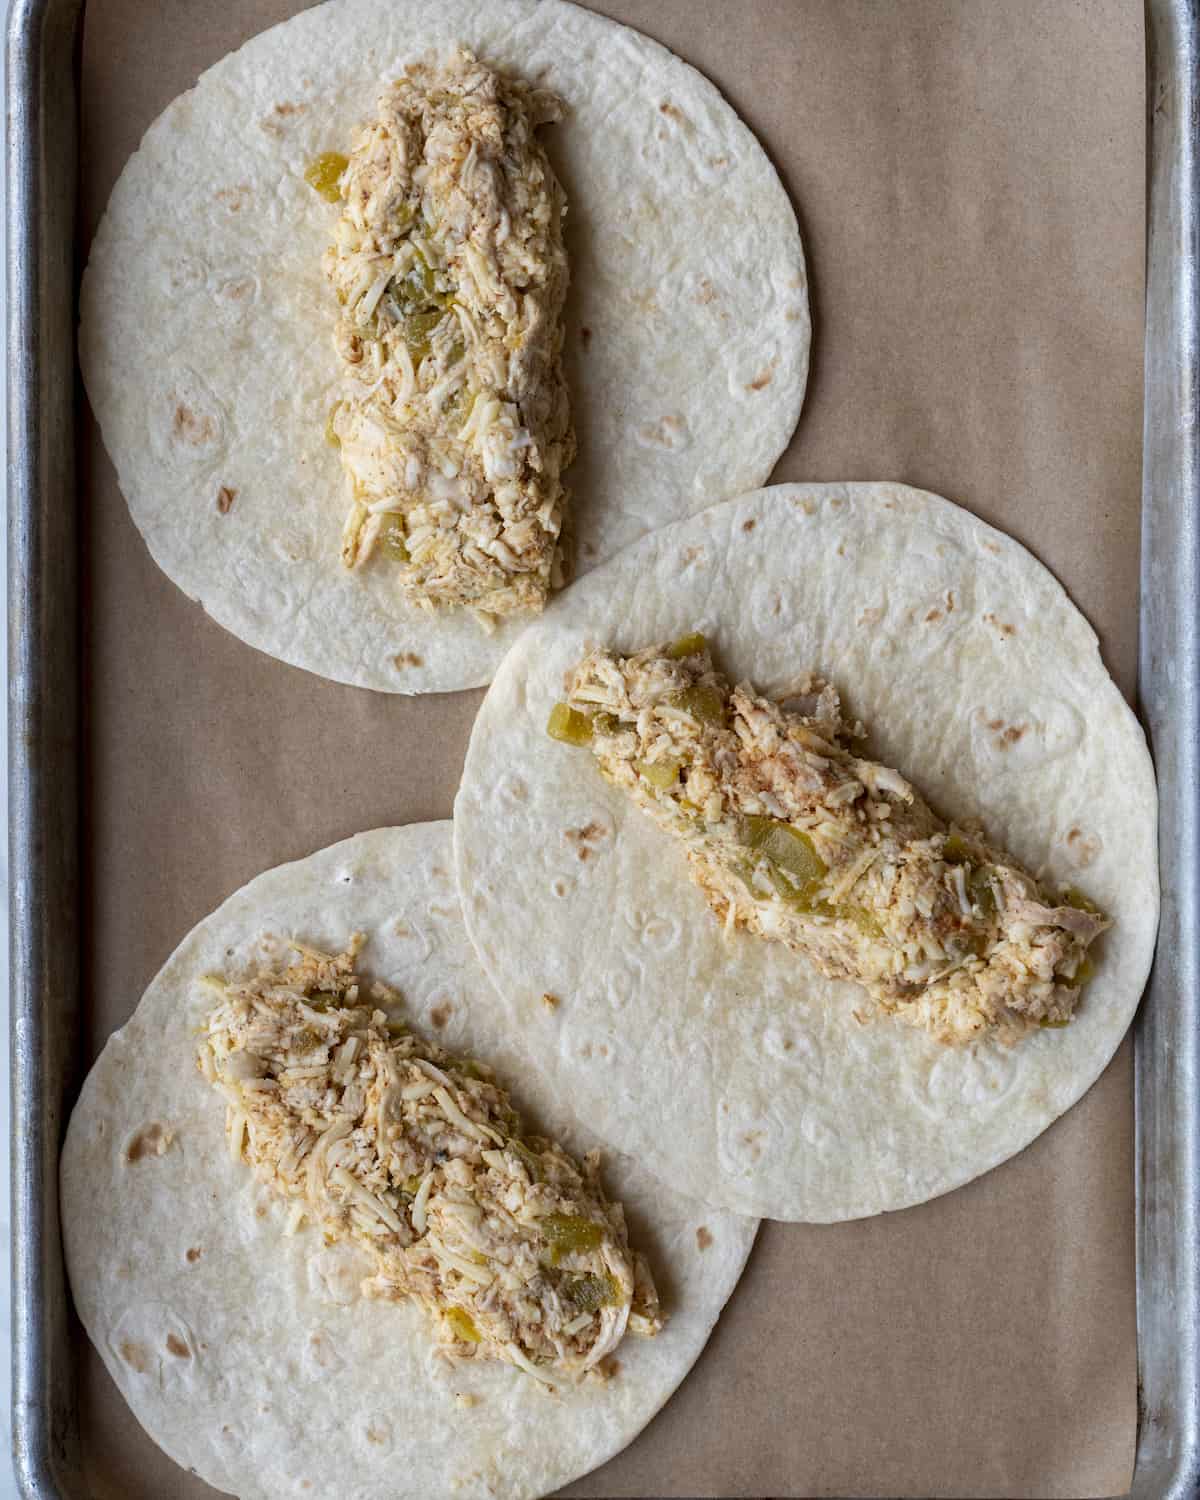 A baking tray lined with parchment paper, with three flour tortillas with the shredded chicken mixture in the center of each.